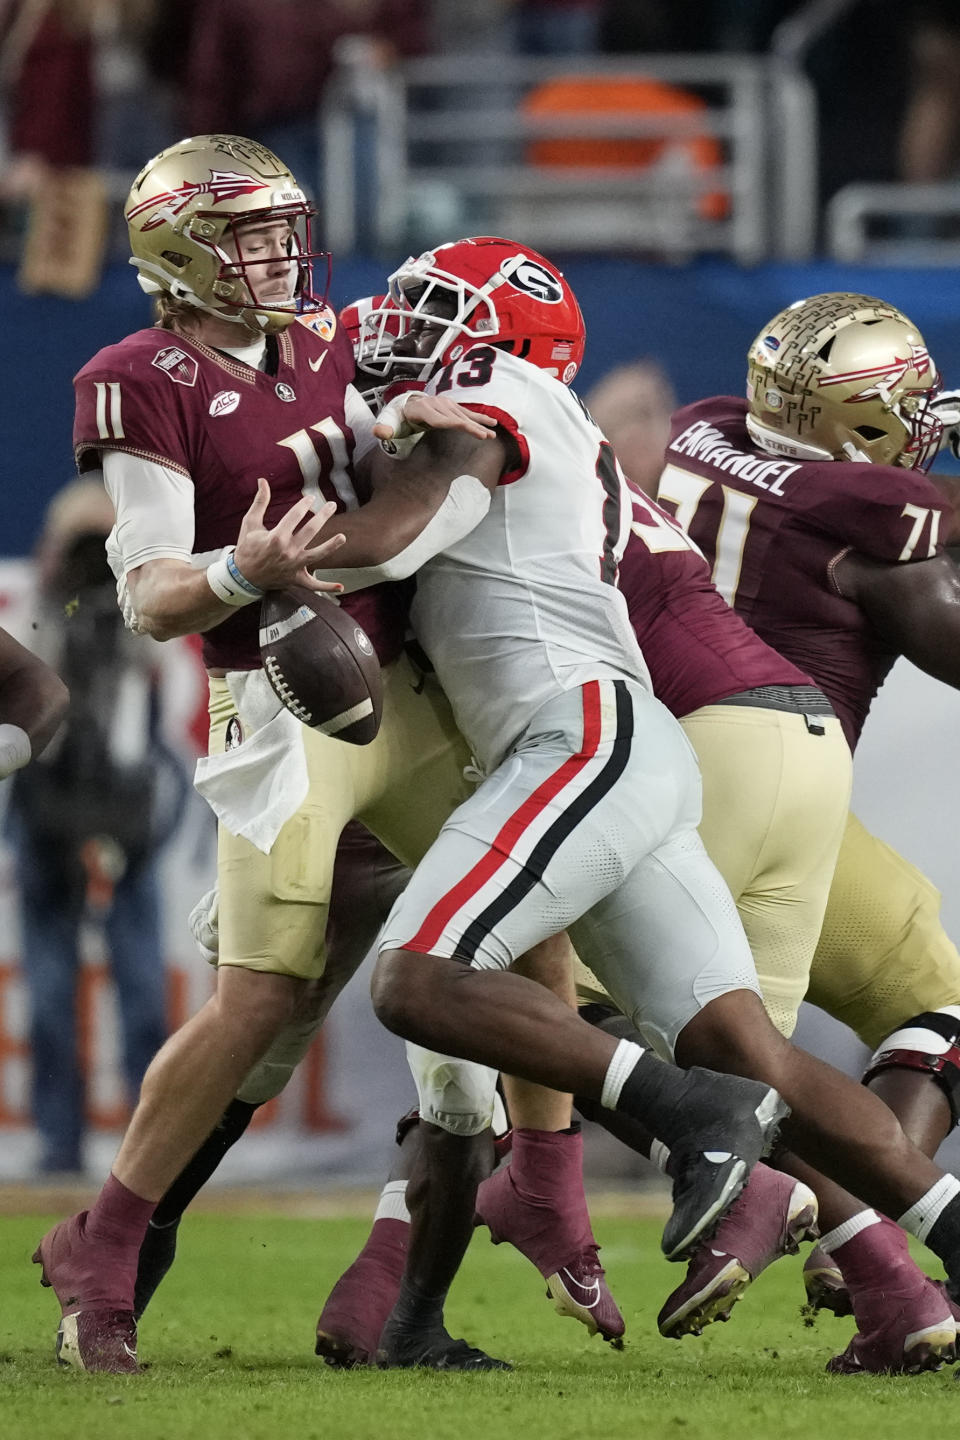 Florida State quarterback Brock Glenn (11) fumbles the ball as he is sacked by Georgia defensive lineman Mykel Williams (13) in the first half of the Orange Bowl NCAA college football game, Saturday, Dec. 30, 2023, in Miami Gardens, Fla. (AP Photo/Rebecca Blackwell)